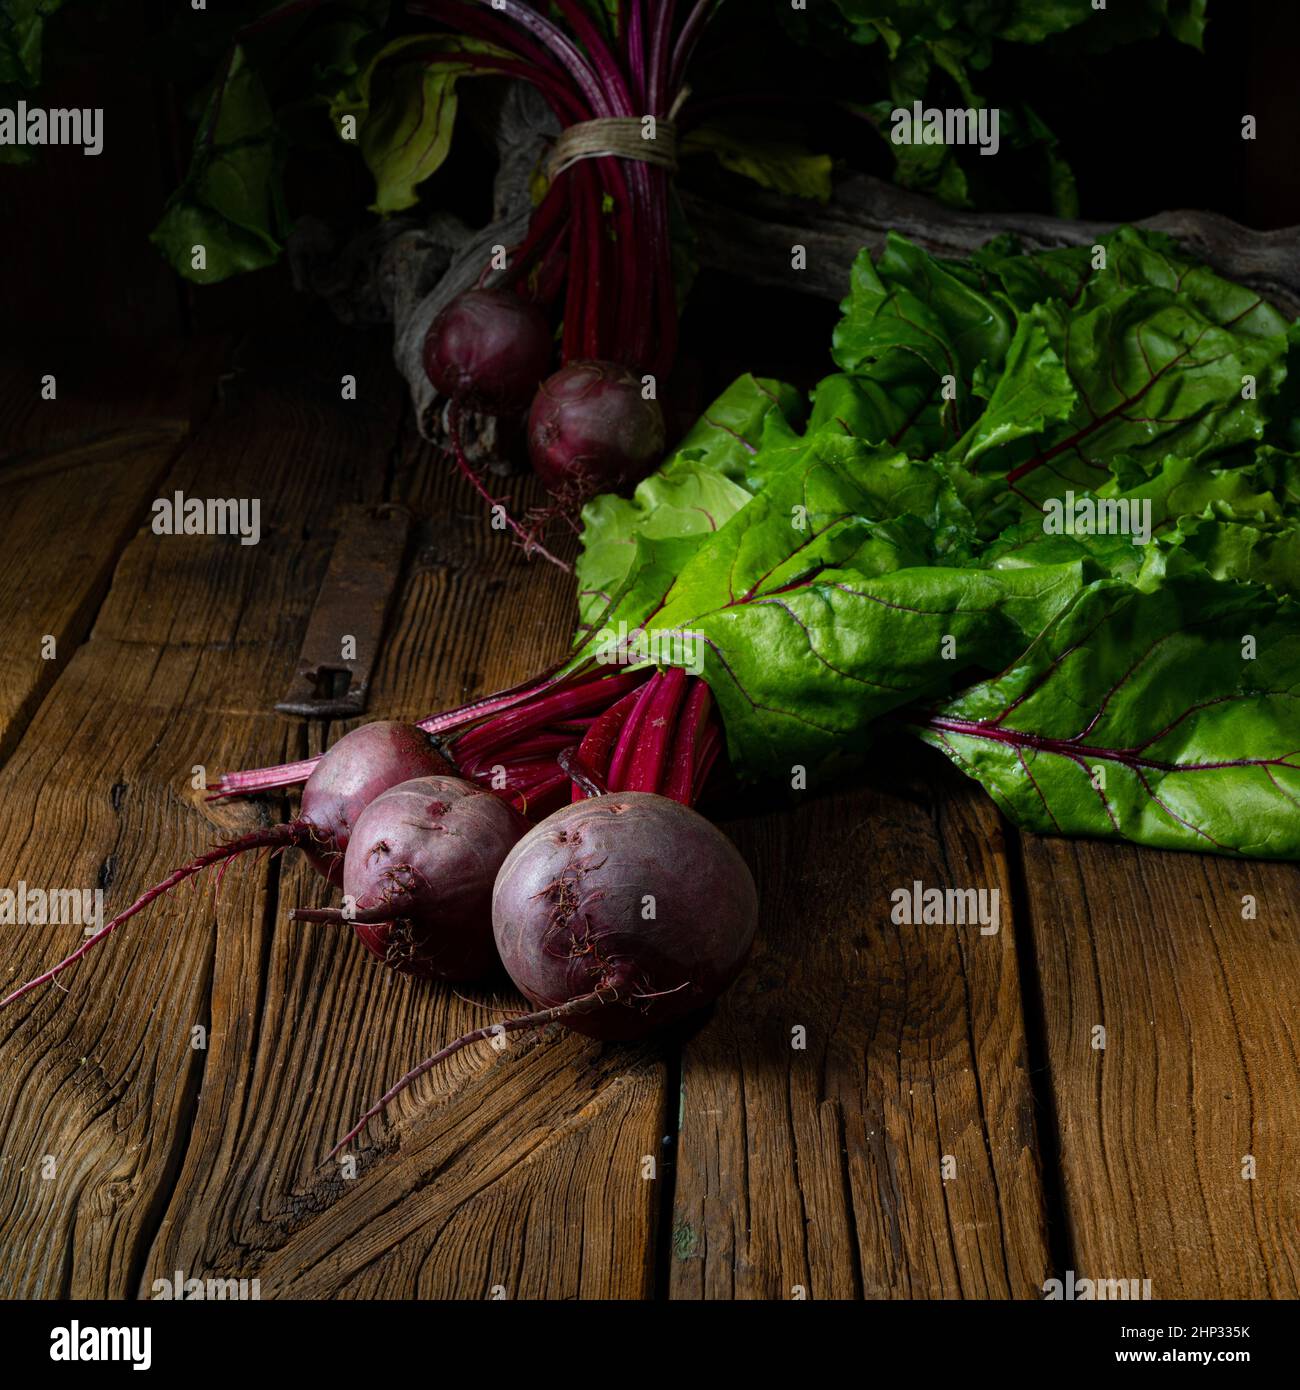 Botwina, Rustic Young Beetroot Stock Photo